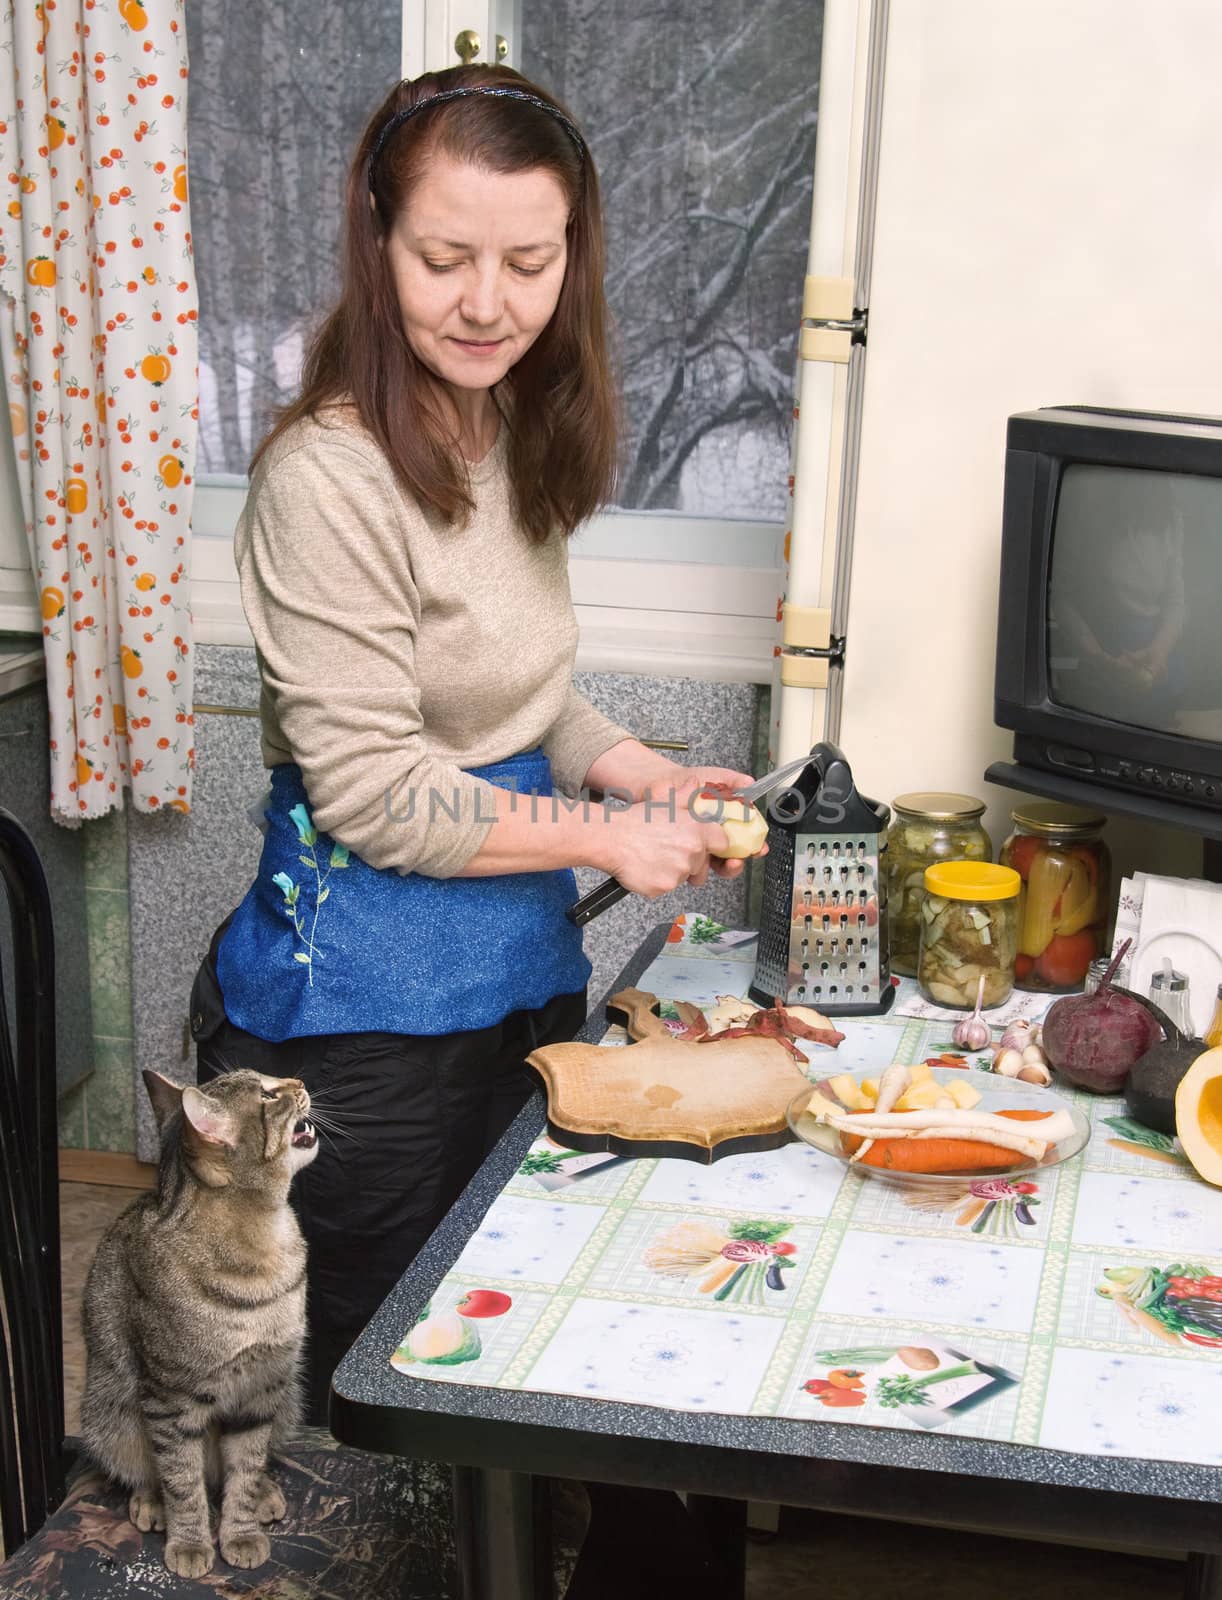 The woman makes a dinner and talks to a cat